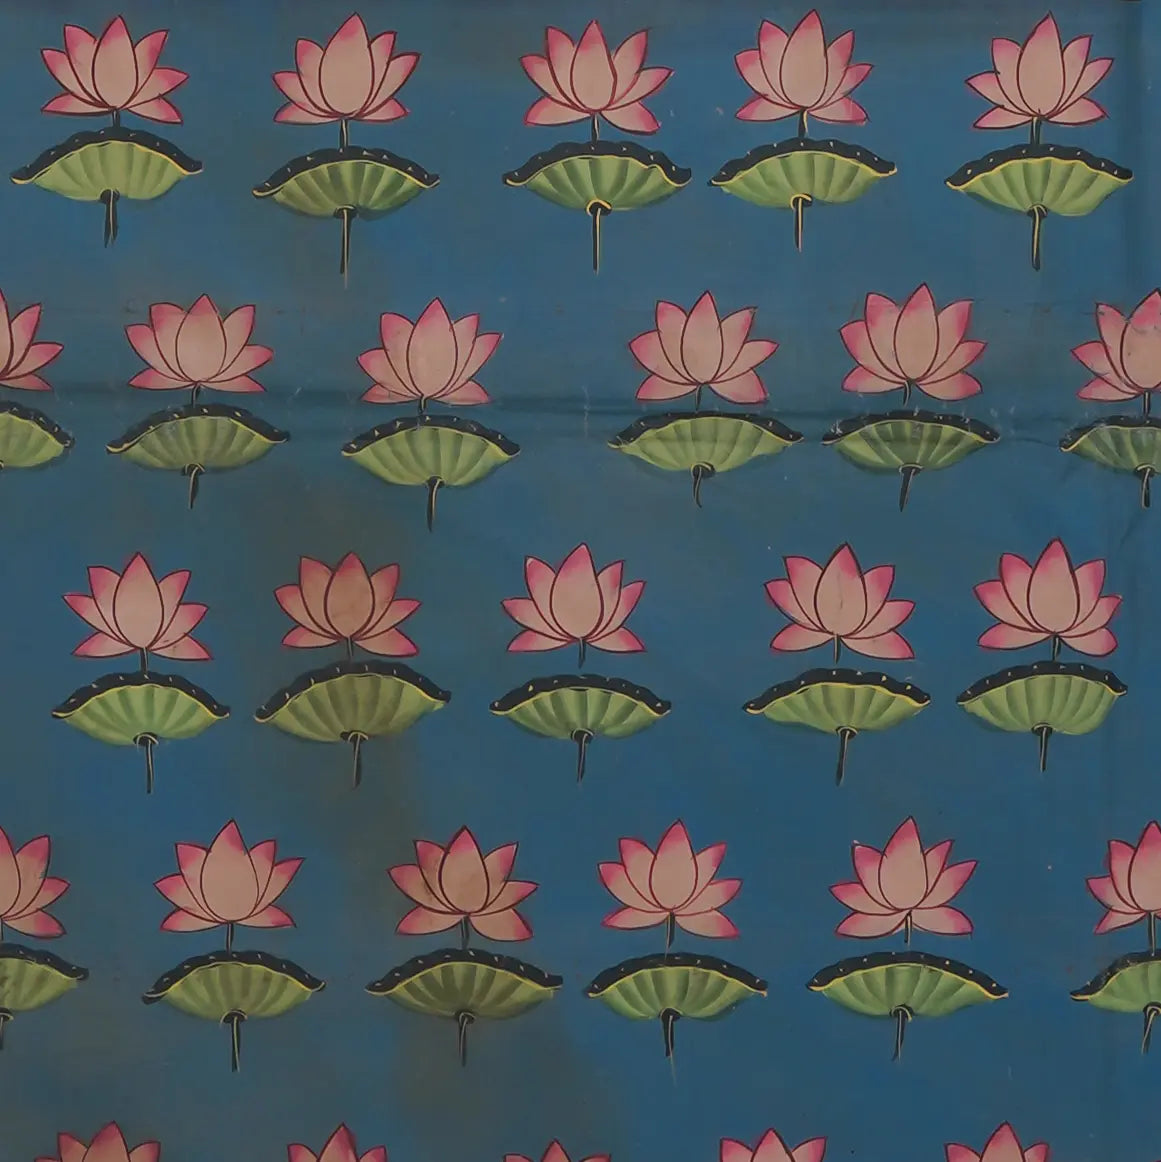 Field of Lotus Pichwai Pichwai Handmade Painting For Home Wall Decor